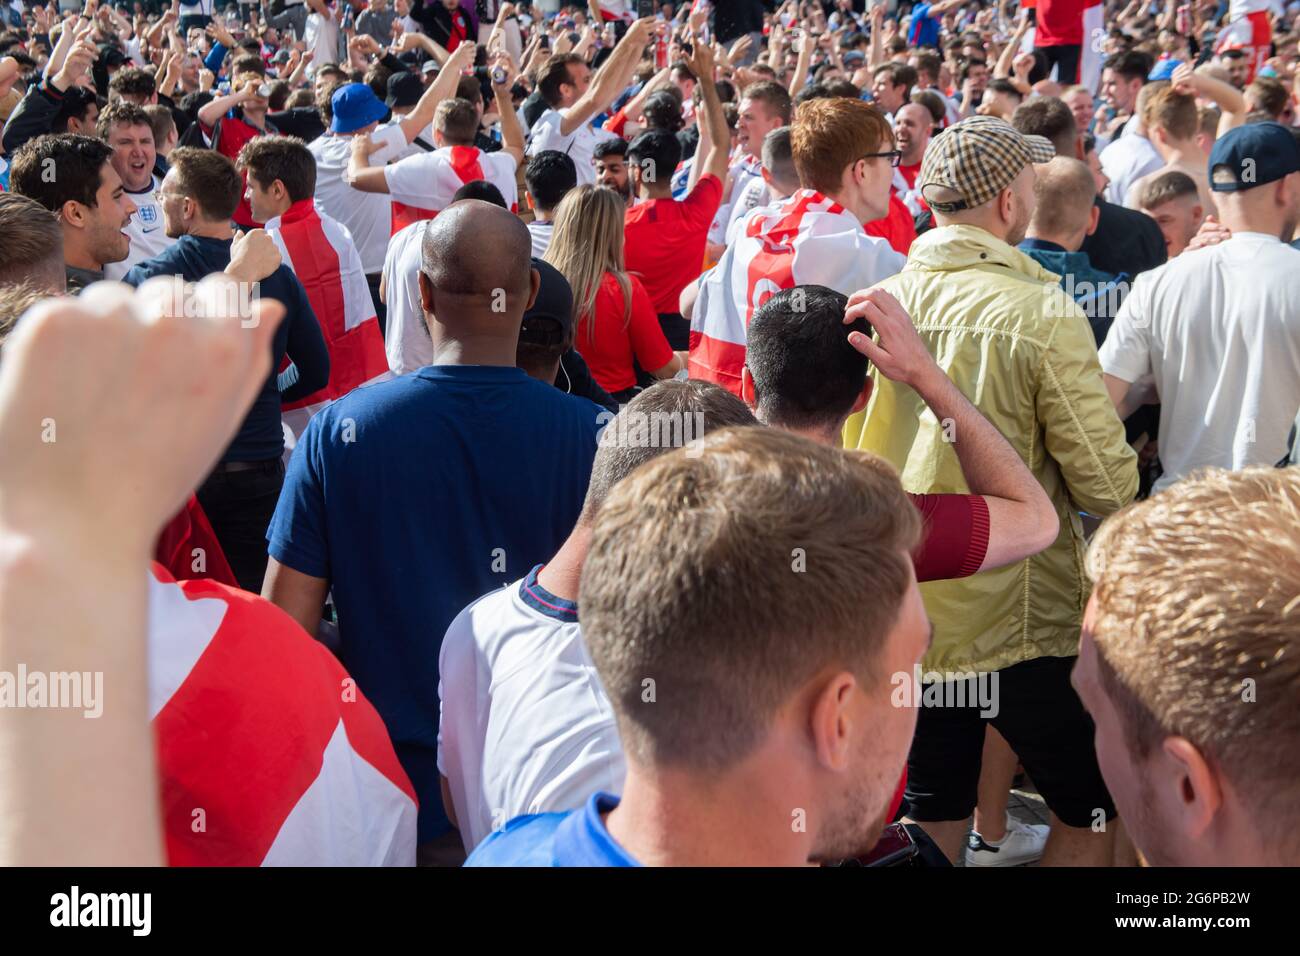 London, UK. 7th July 2021. England fans excited prior to the UEFA Euro 2020 Semi-Final match between England and Demark at Wembley Stadium. Michael Tubi / Alamy Live News Stock Photo